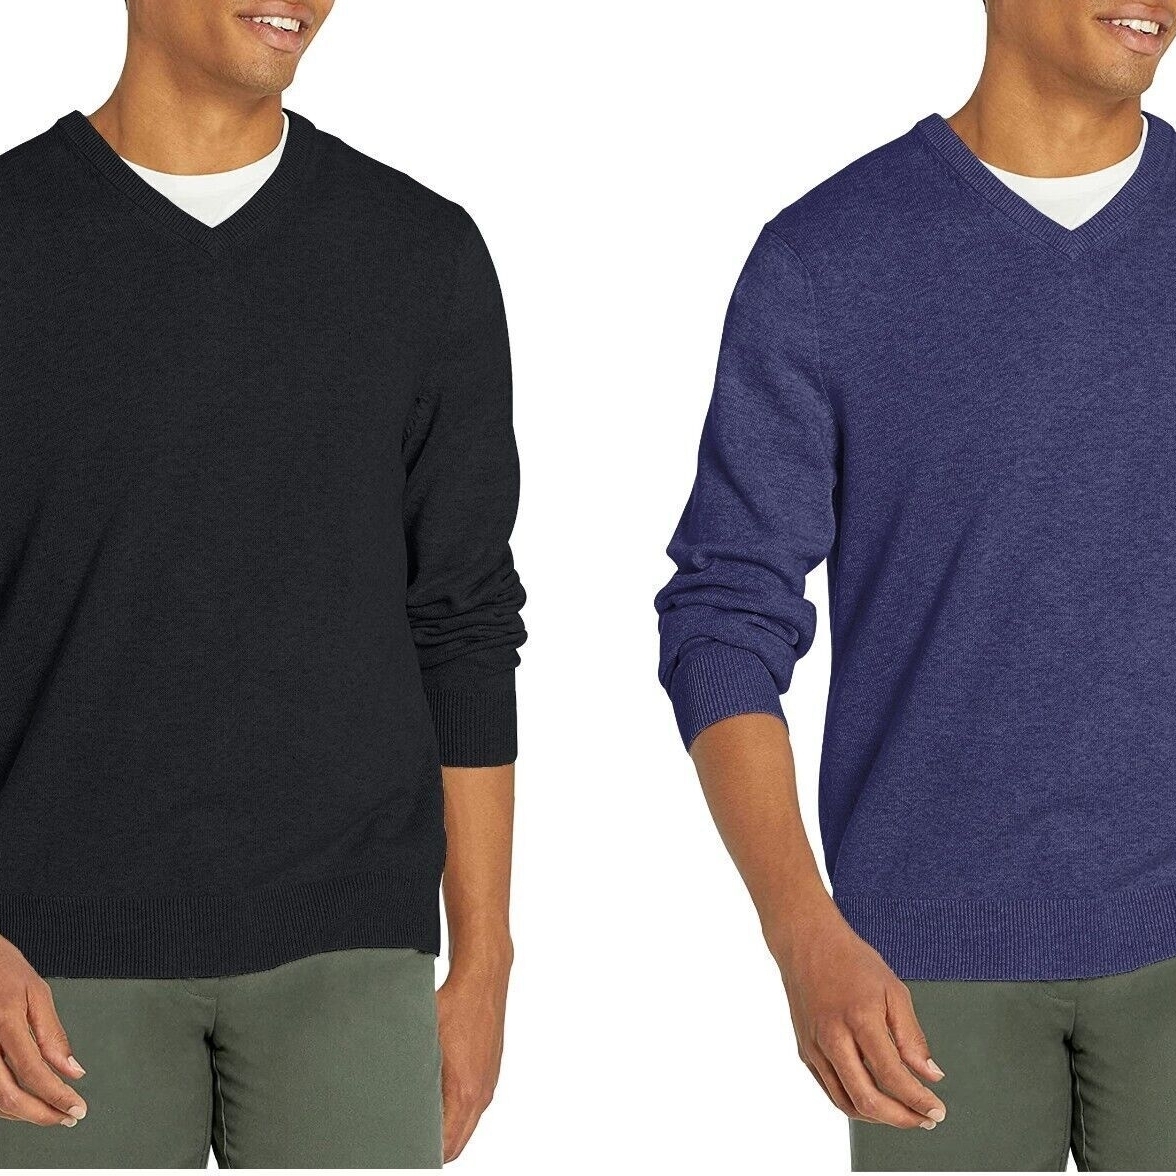 2-Pack Men's Casual Cozy Ultra Soft Slim Fit Warm Knit Pullover V-Neck Sweater - Black&Blue, Small